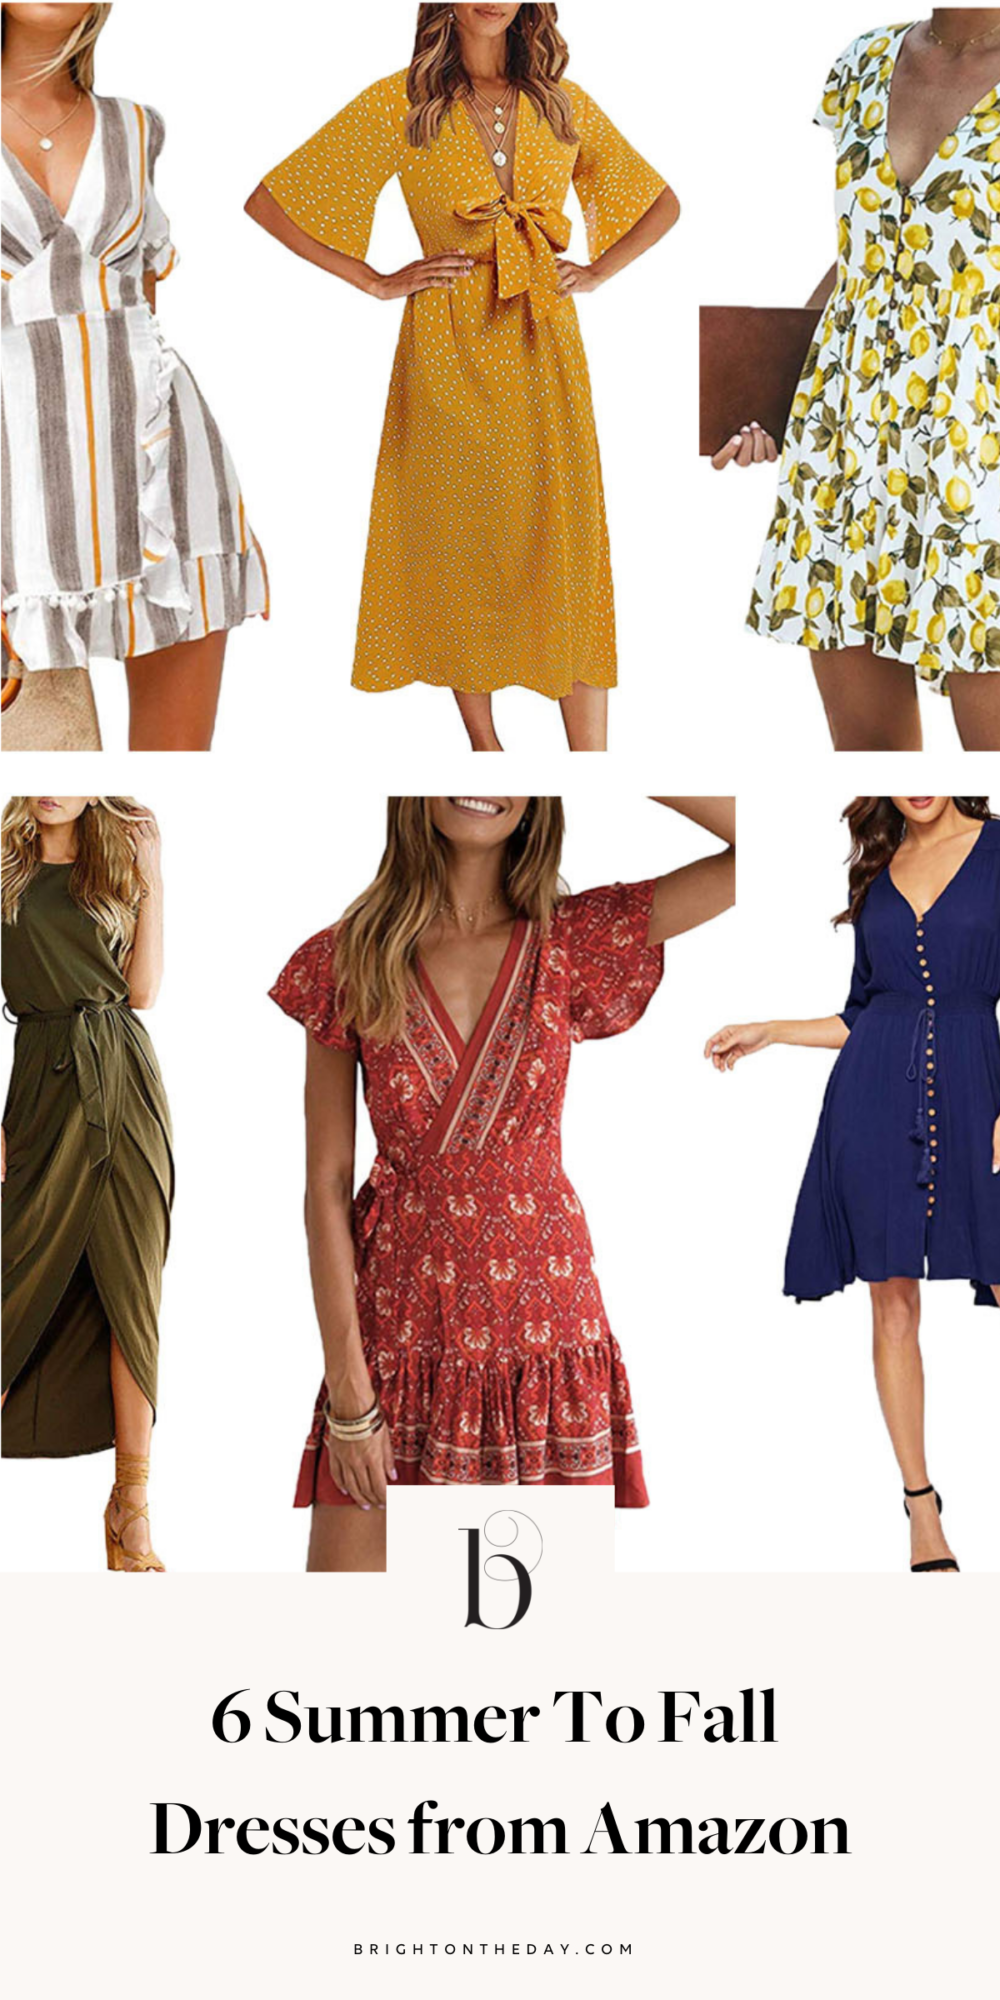 amazon dresses summer to fall